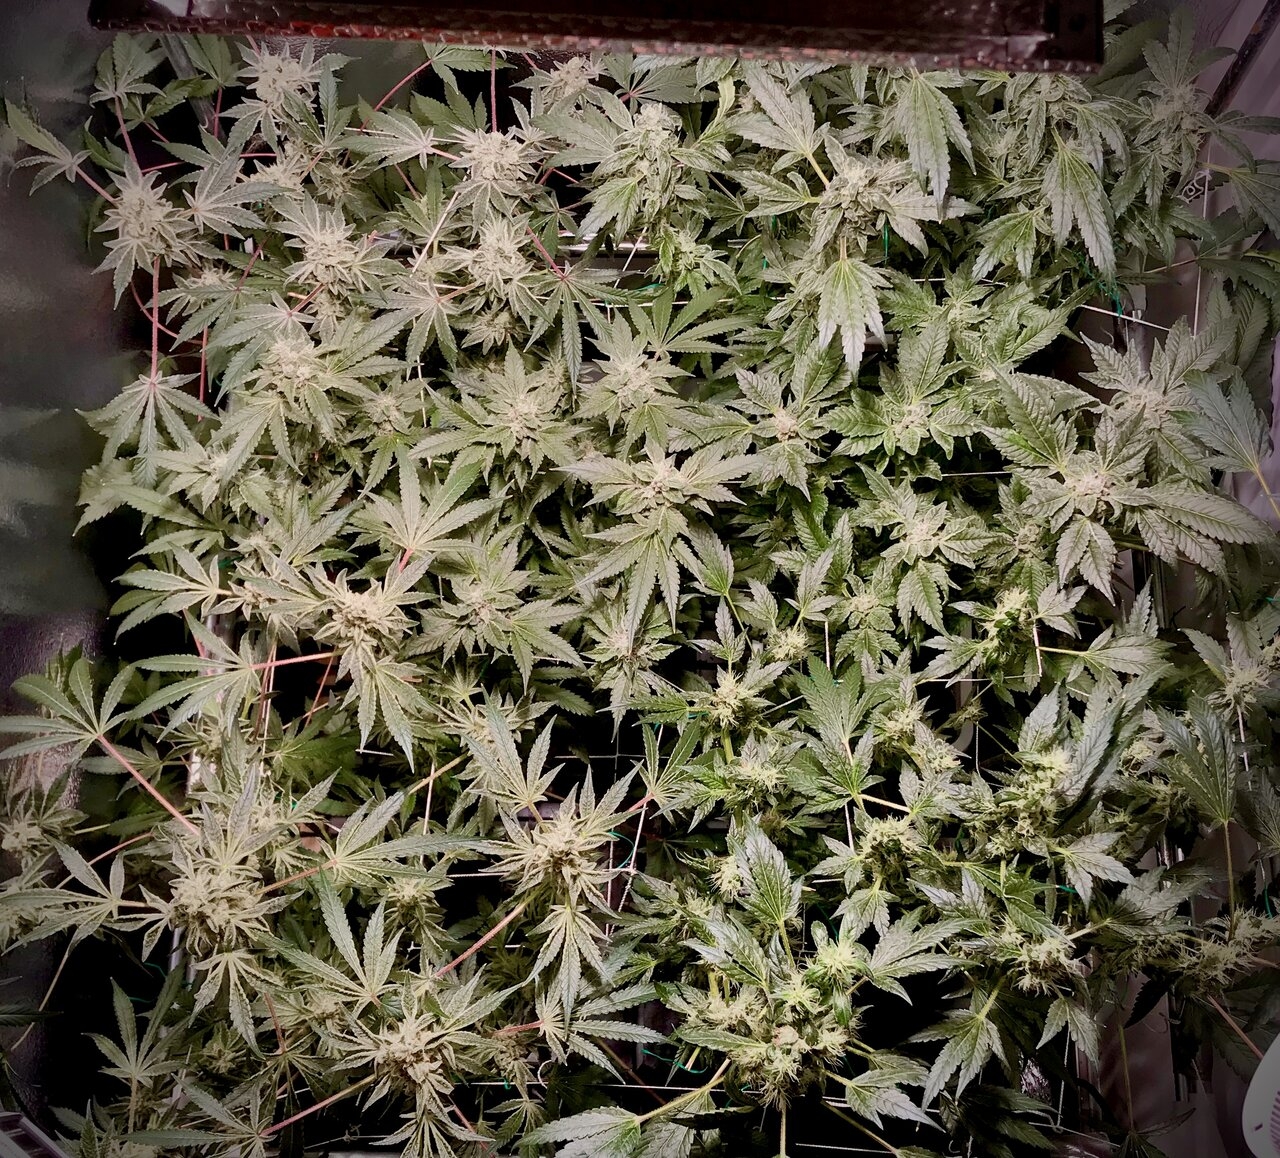 Day 56 from flip